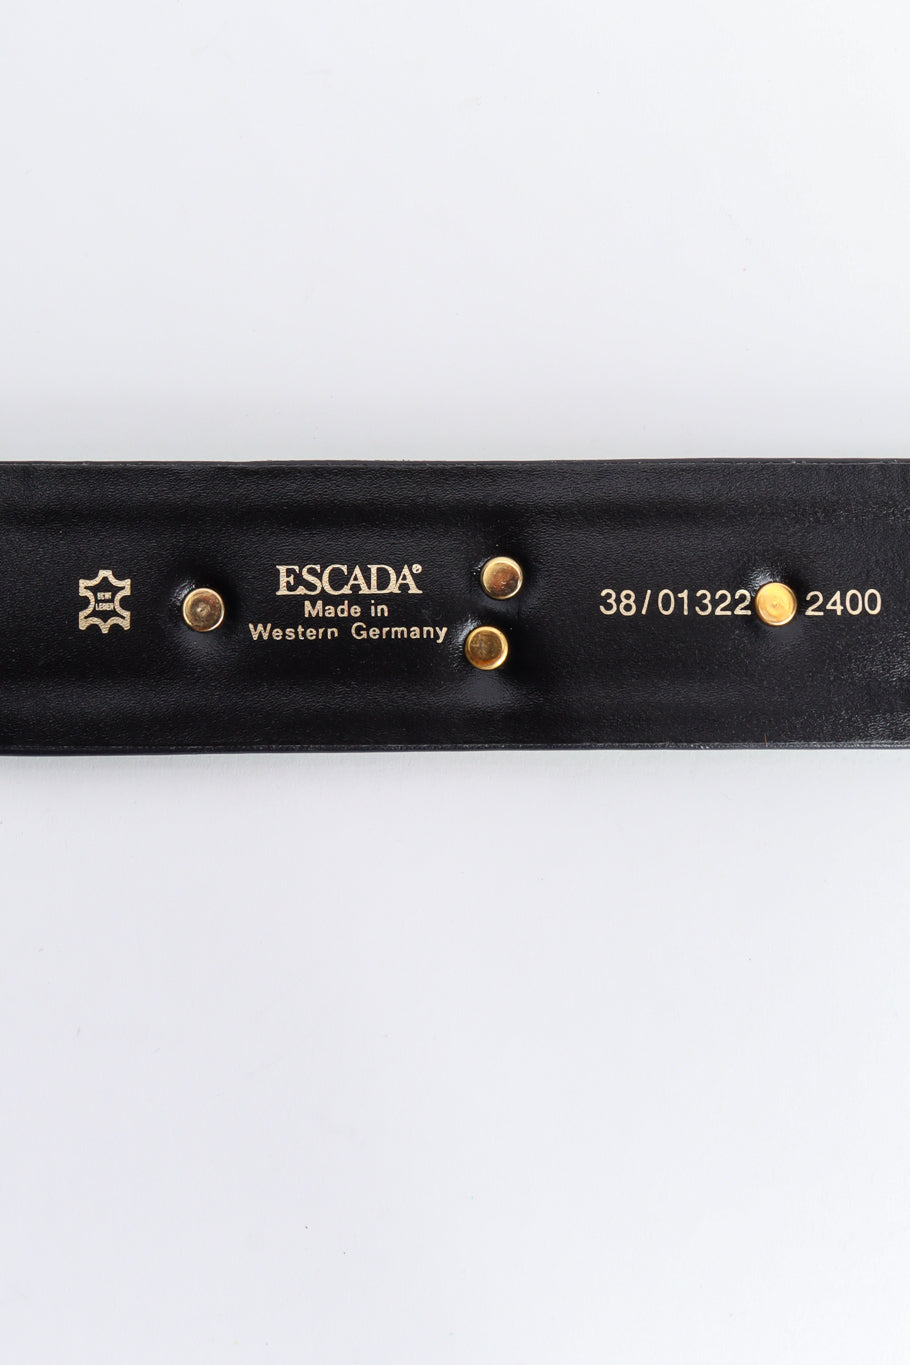 panther studded leather belt by Escada label @recessla